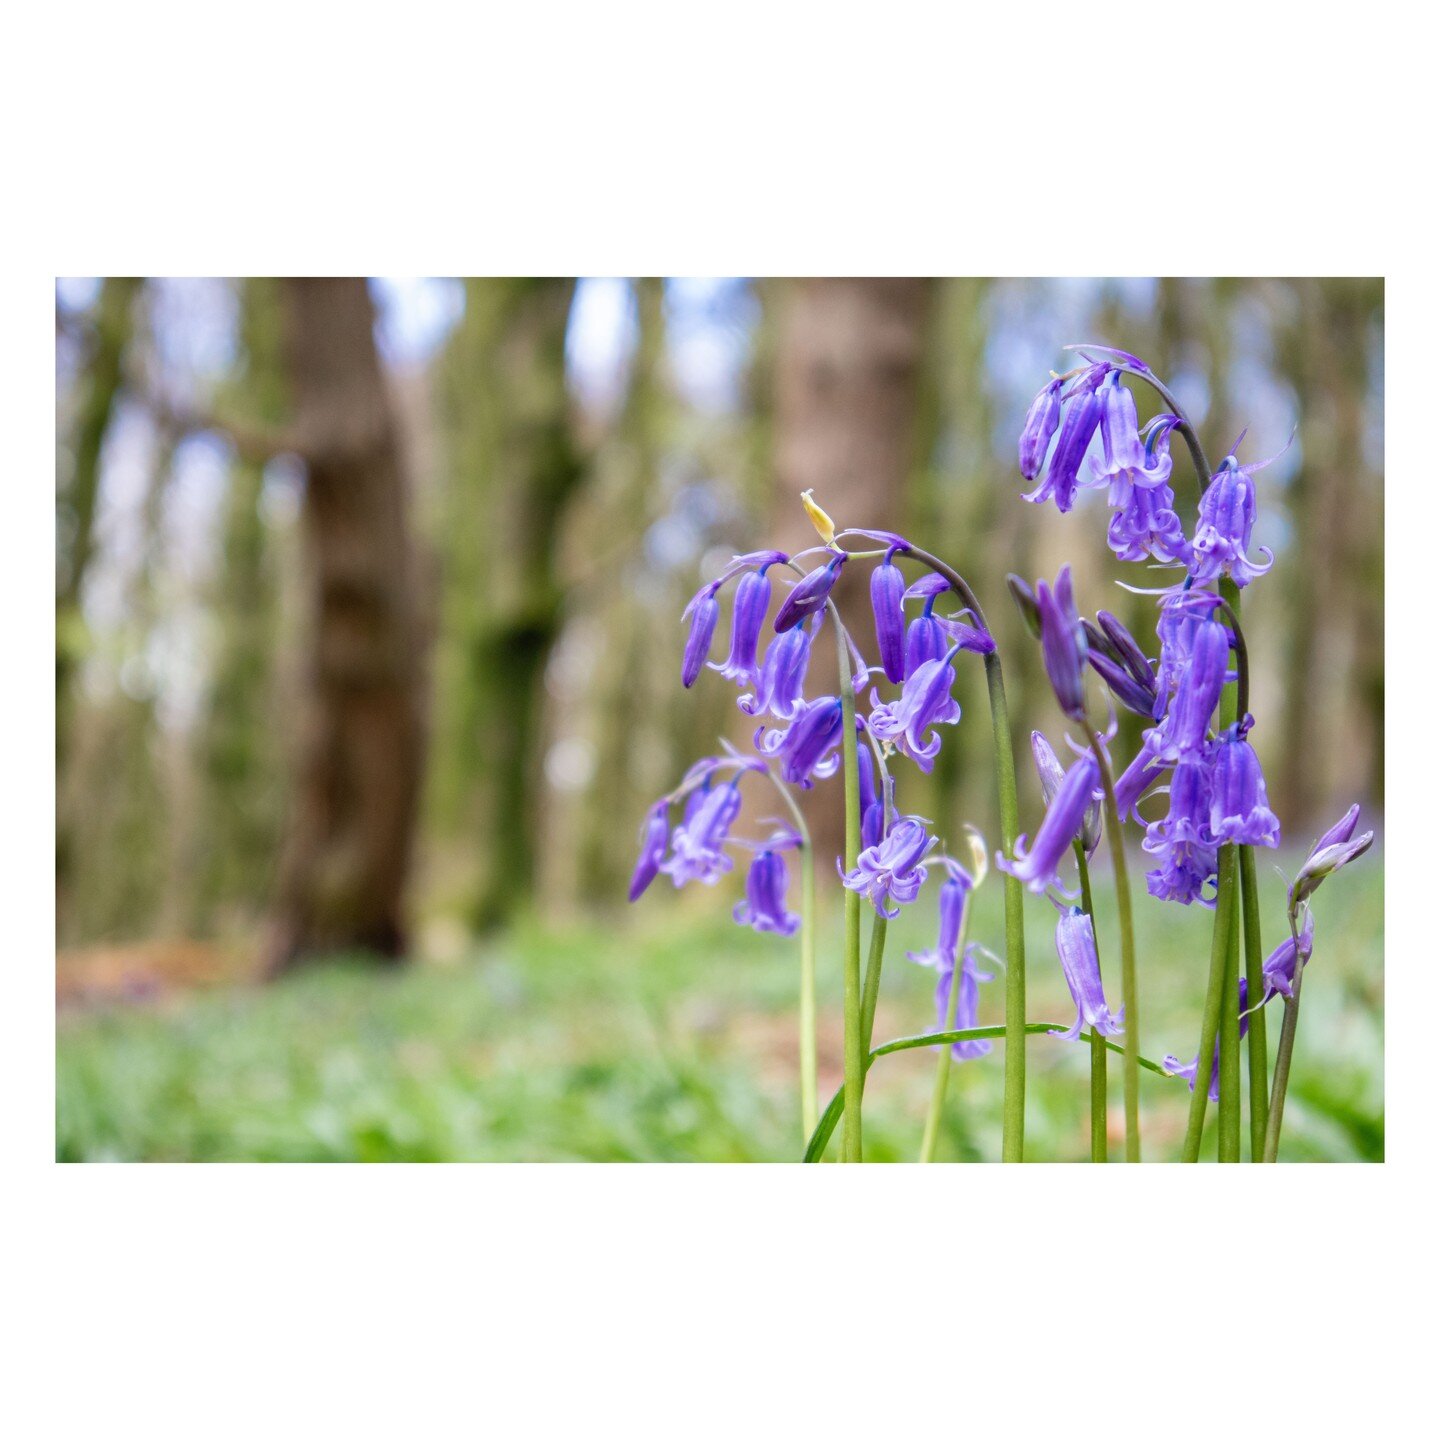 the Bluebell woods of Cardiff. 112 of 365, no reason other than the joy of image making.

.
.
.
.
.
.
.
.
.
#instagramers #photodrome #photooftheday #picoftheday #alemy #art #bestoftheday #beautiful #happy #life #instagood #instamood #igers #light #t